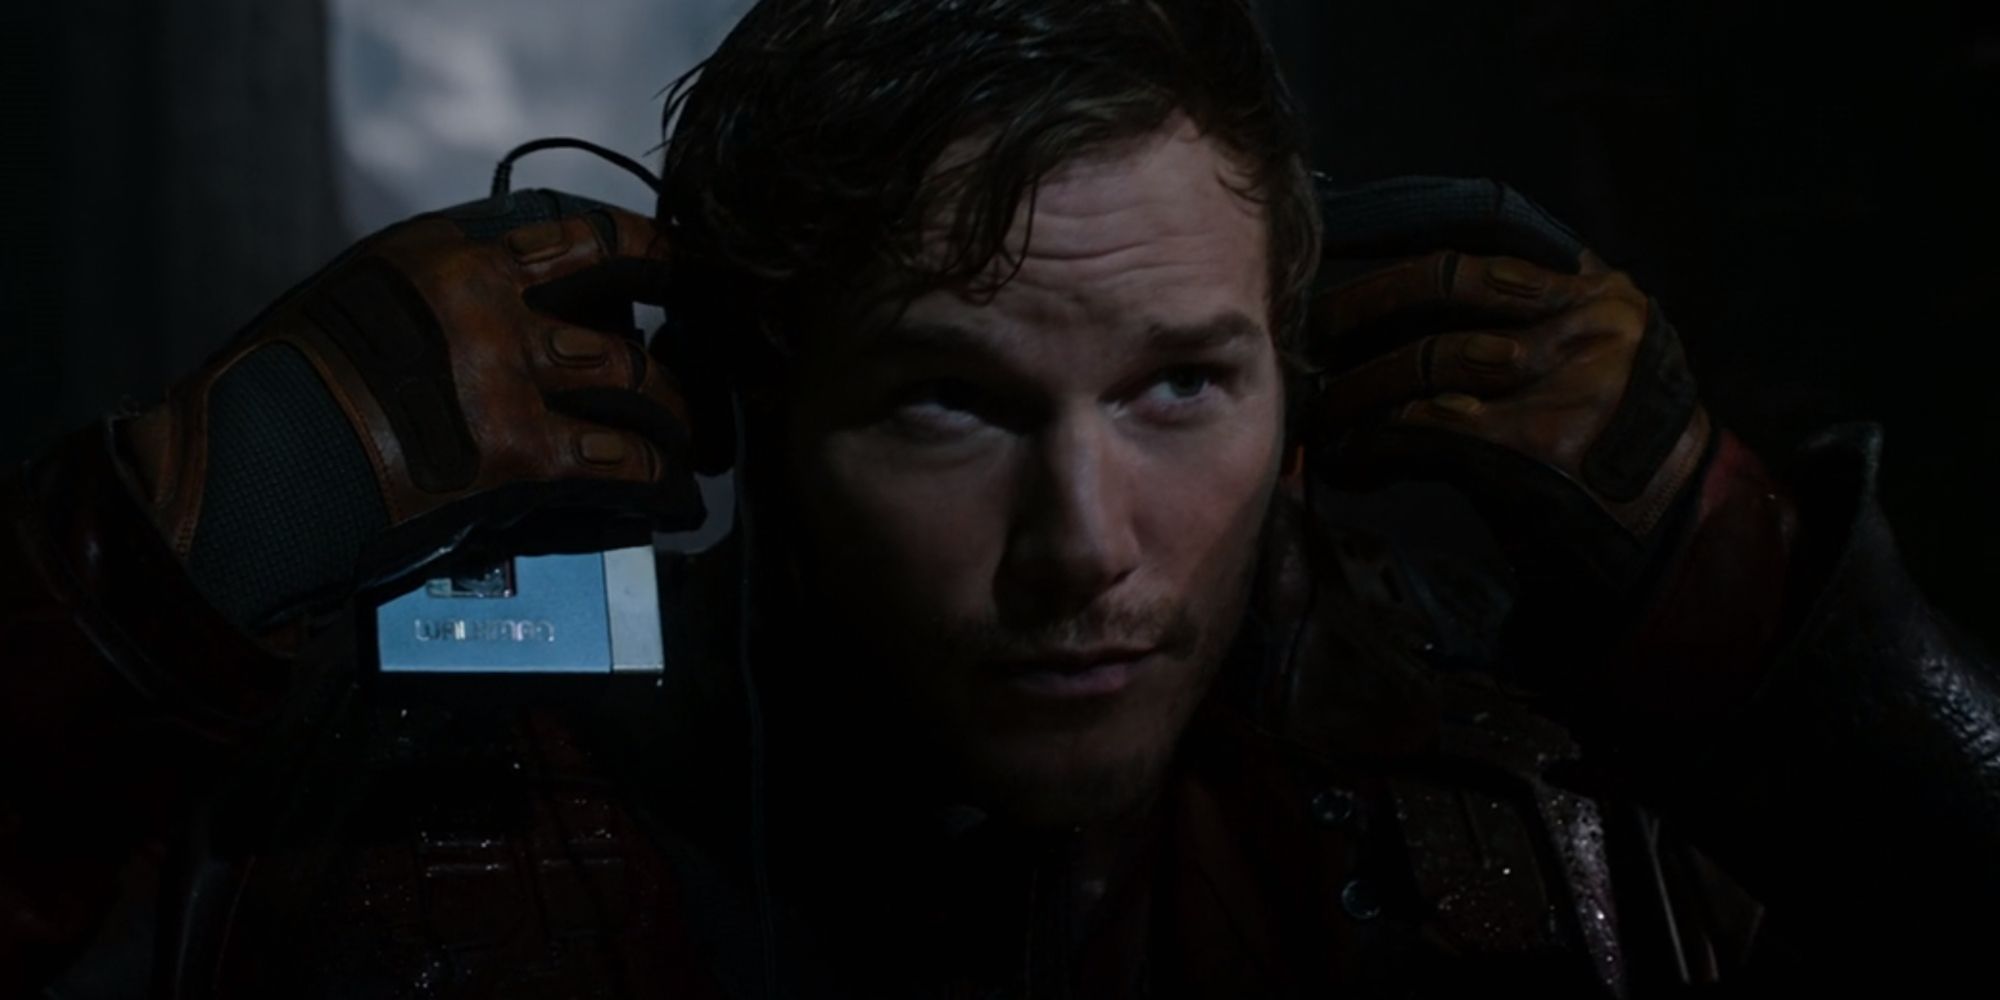 Star Lord putting on his headphones for the first time in Guardians Of The